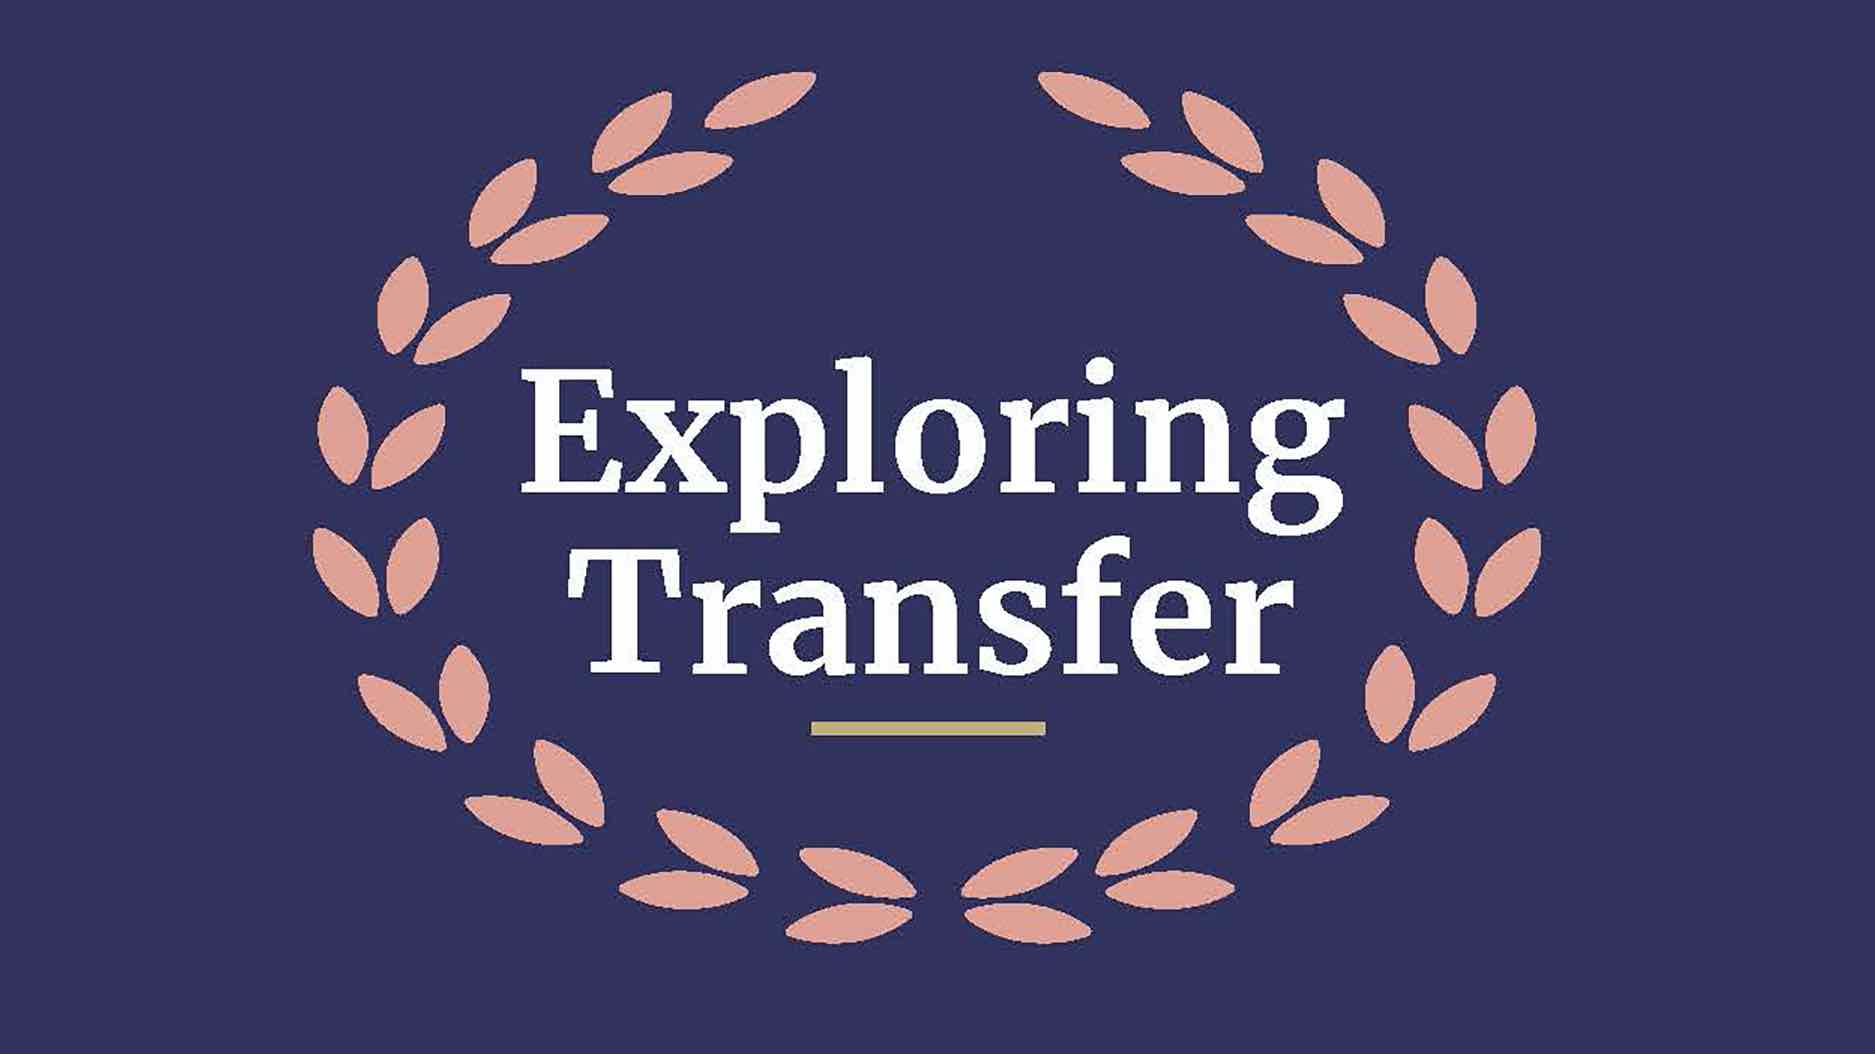 Exploring Transfer logo: purple oval with white lettering